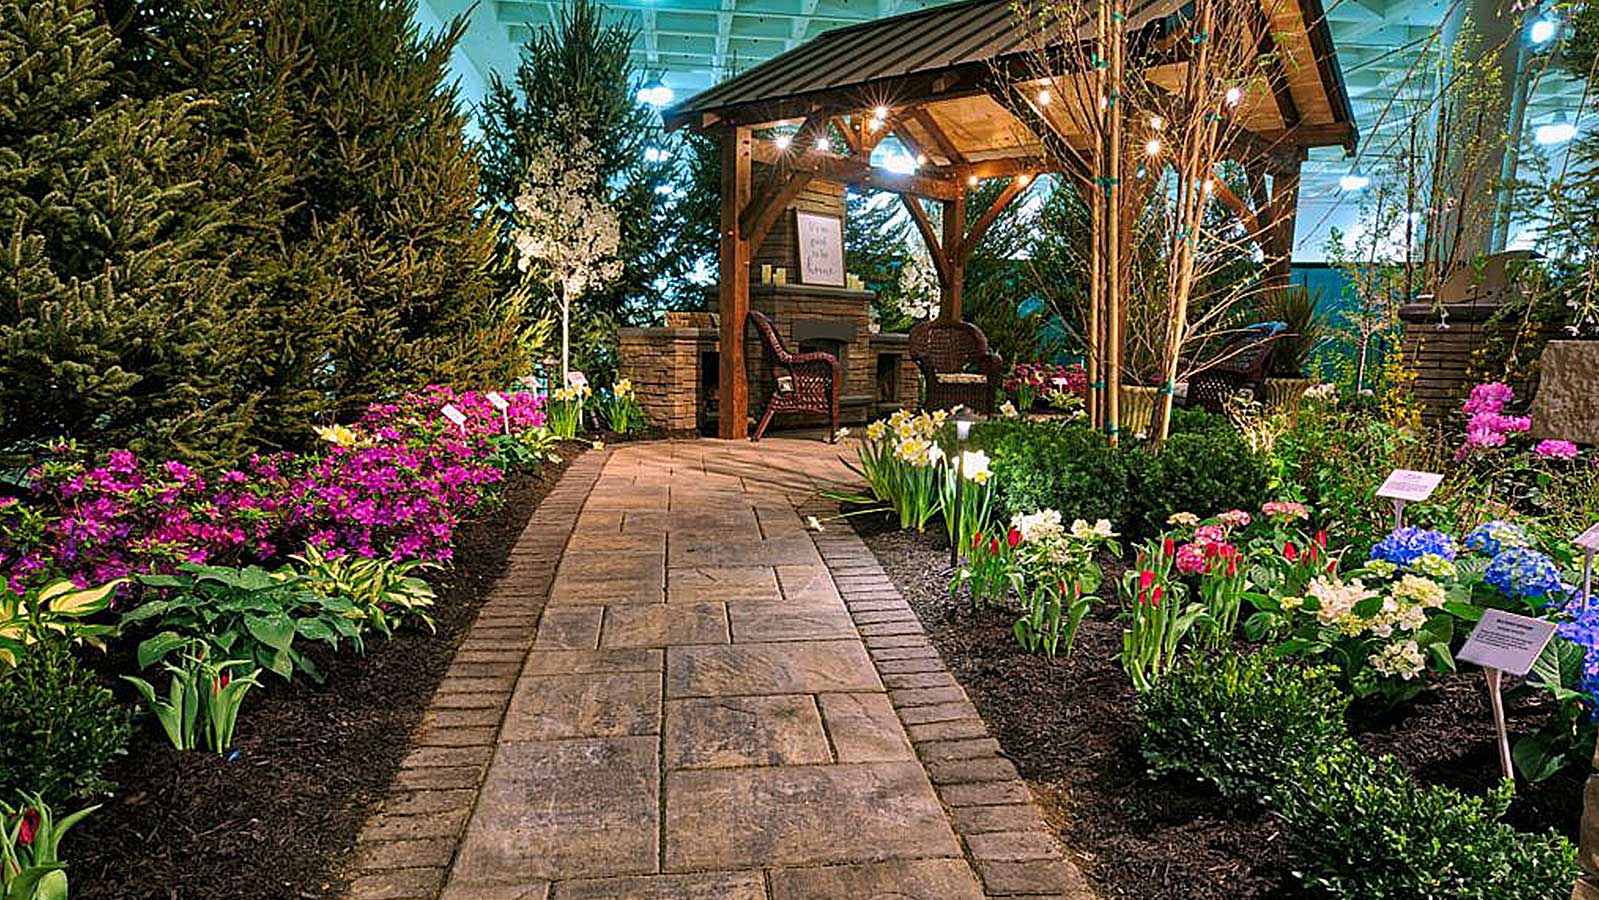 Spring Planning Gets a Boost at The Great Big Home + Garden Show in Cleveland